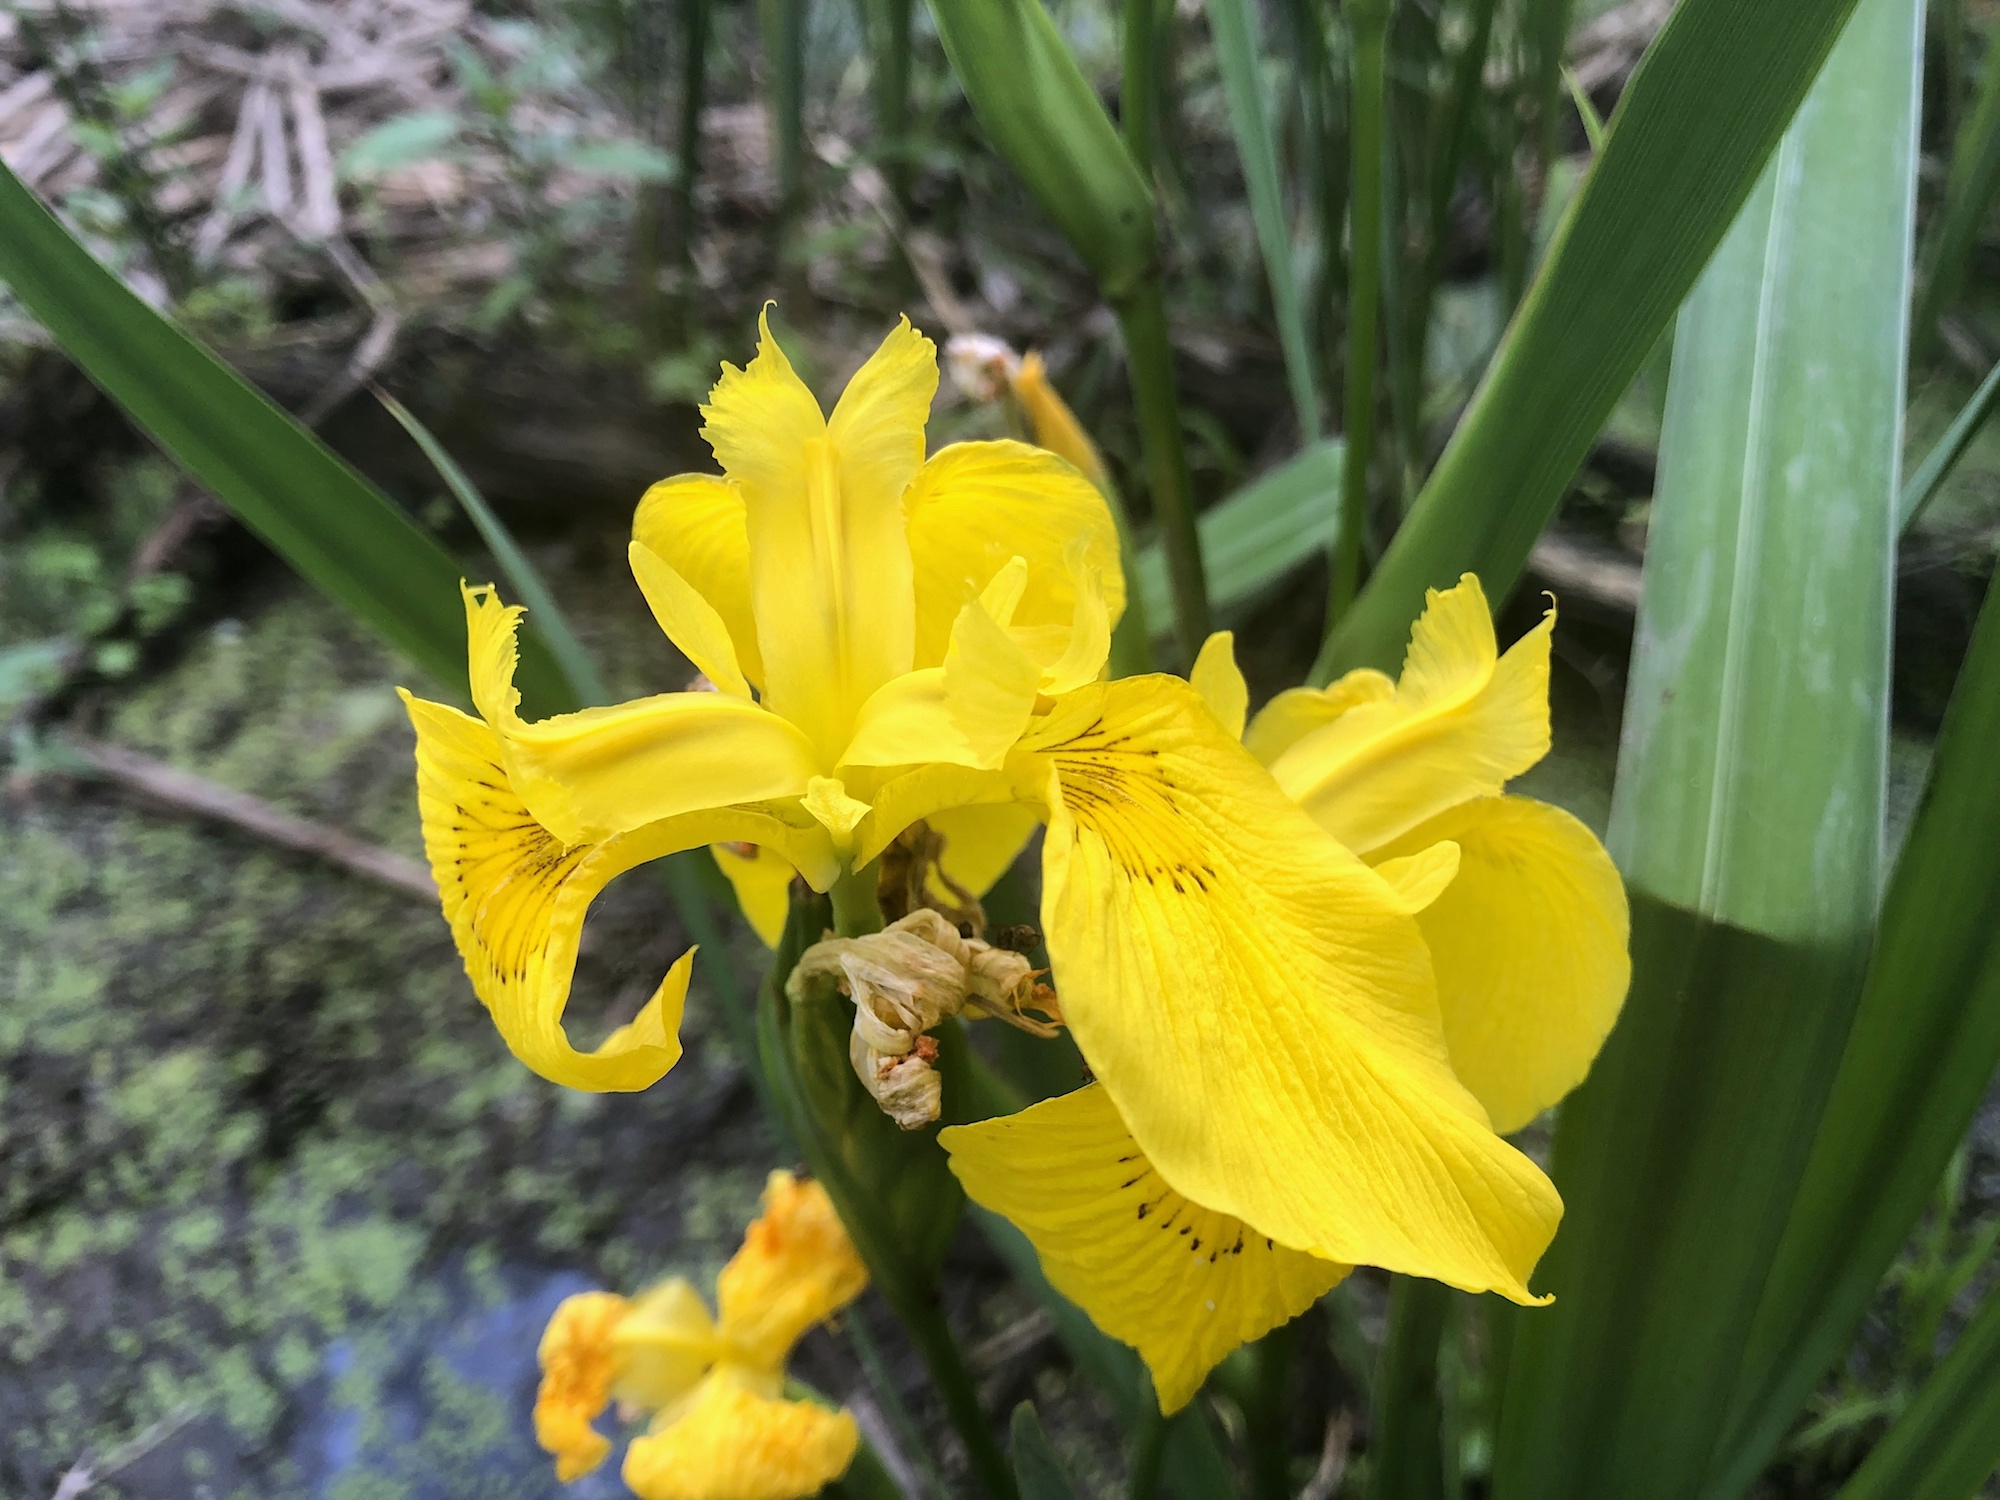 Yellow Flag Iris by Cattails on Lake Wingra on June 18, 2019.